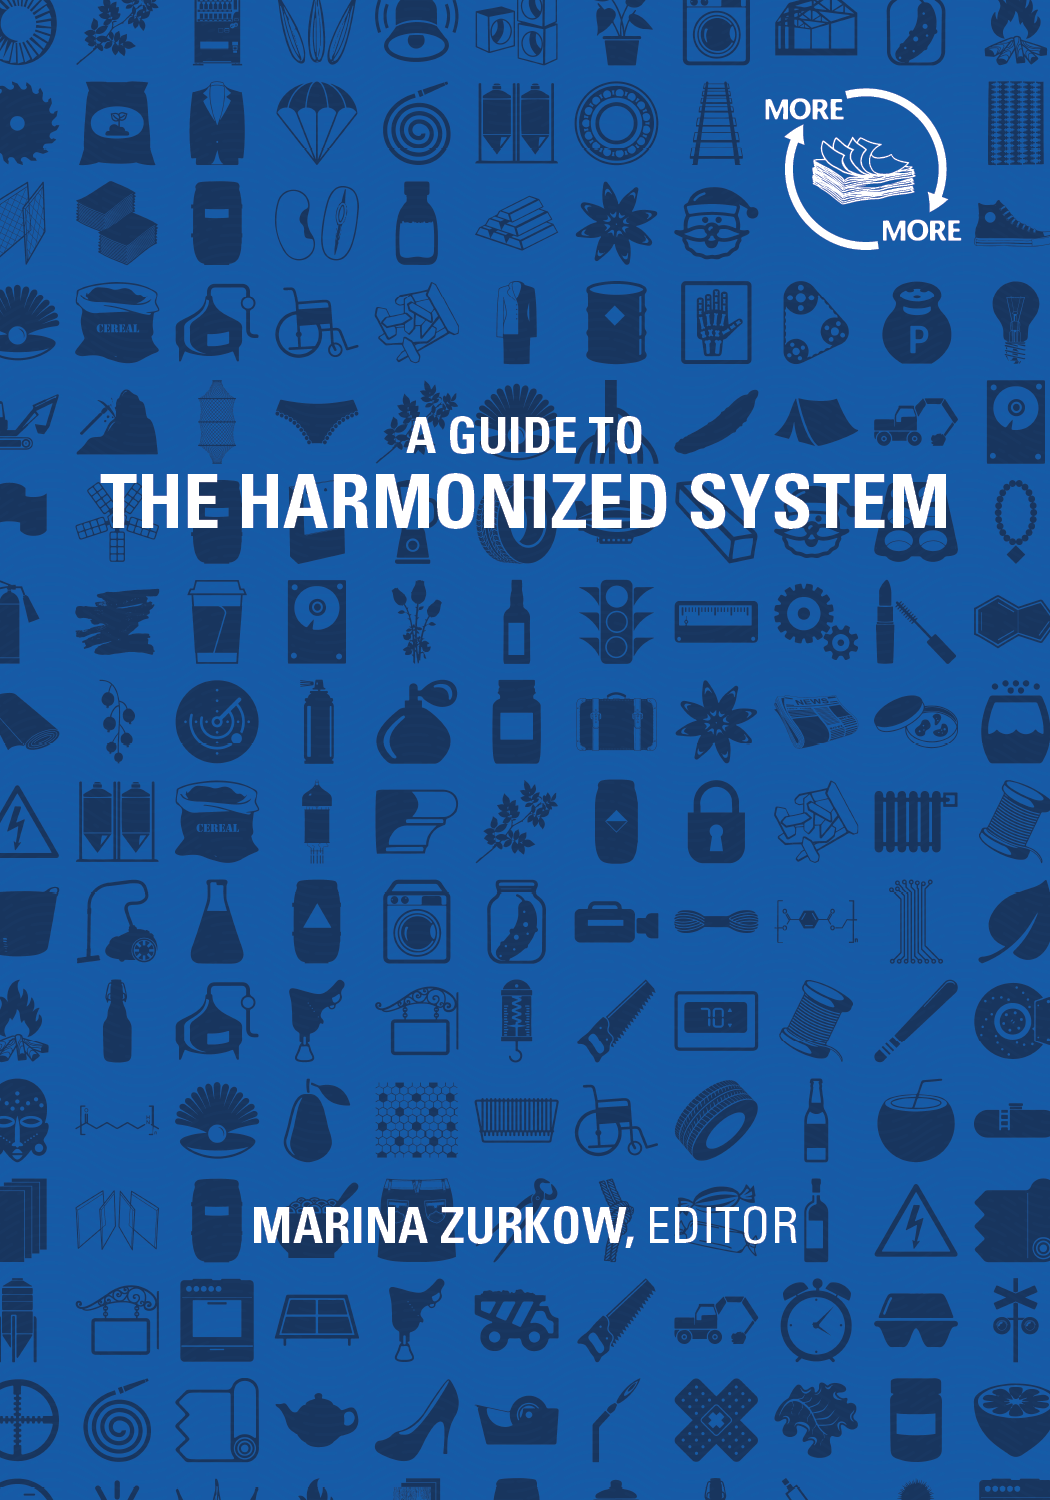 More&More: A Guide to a Harmonized System (punctum books, 2016)